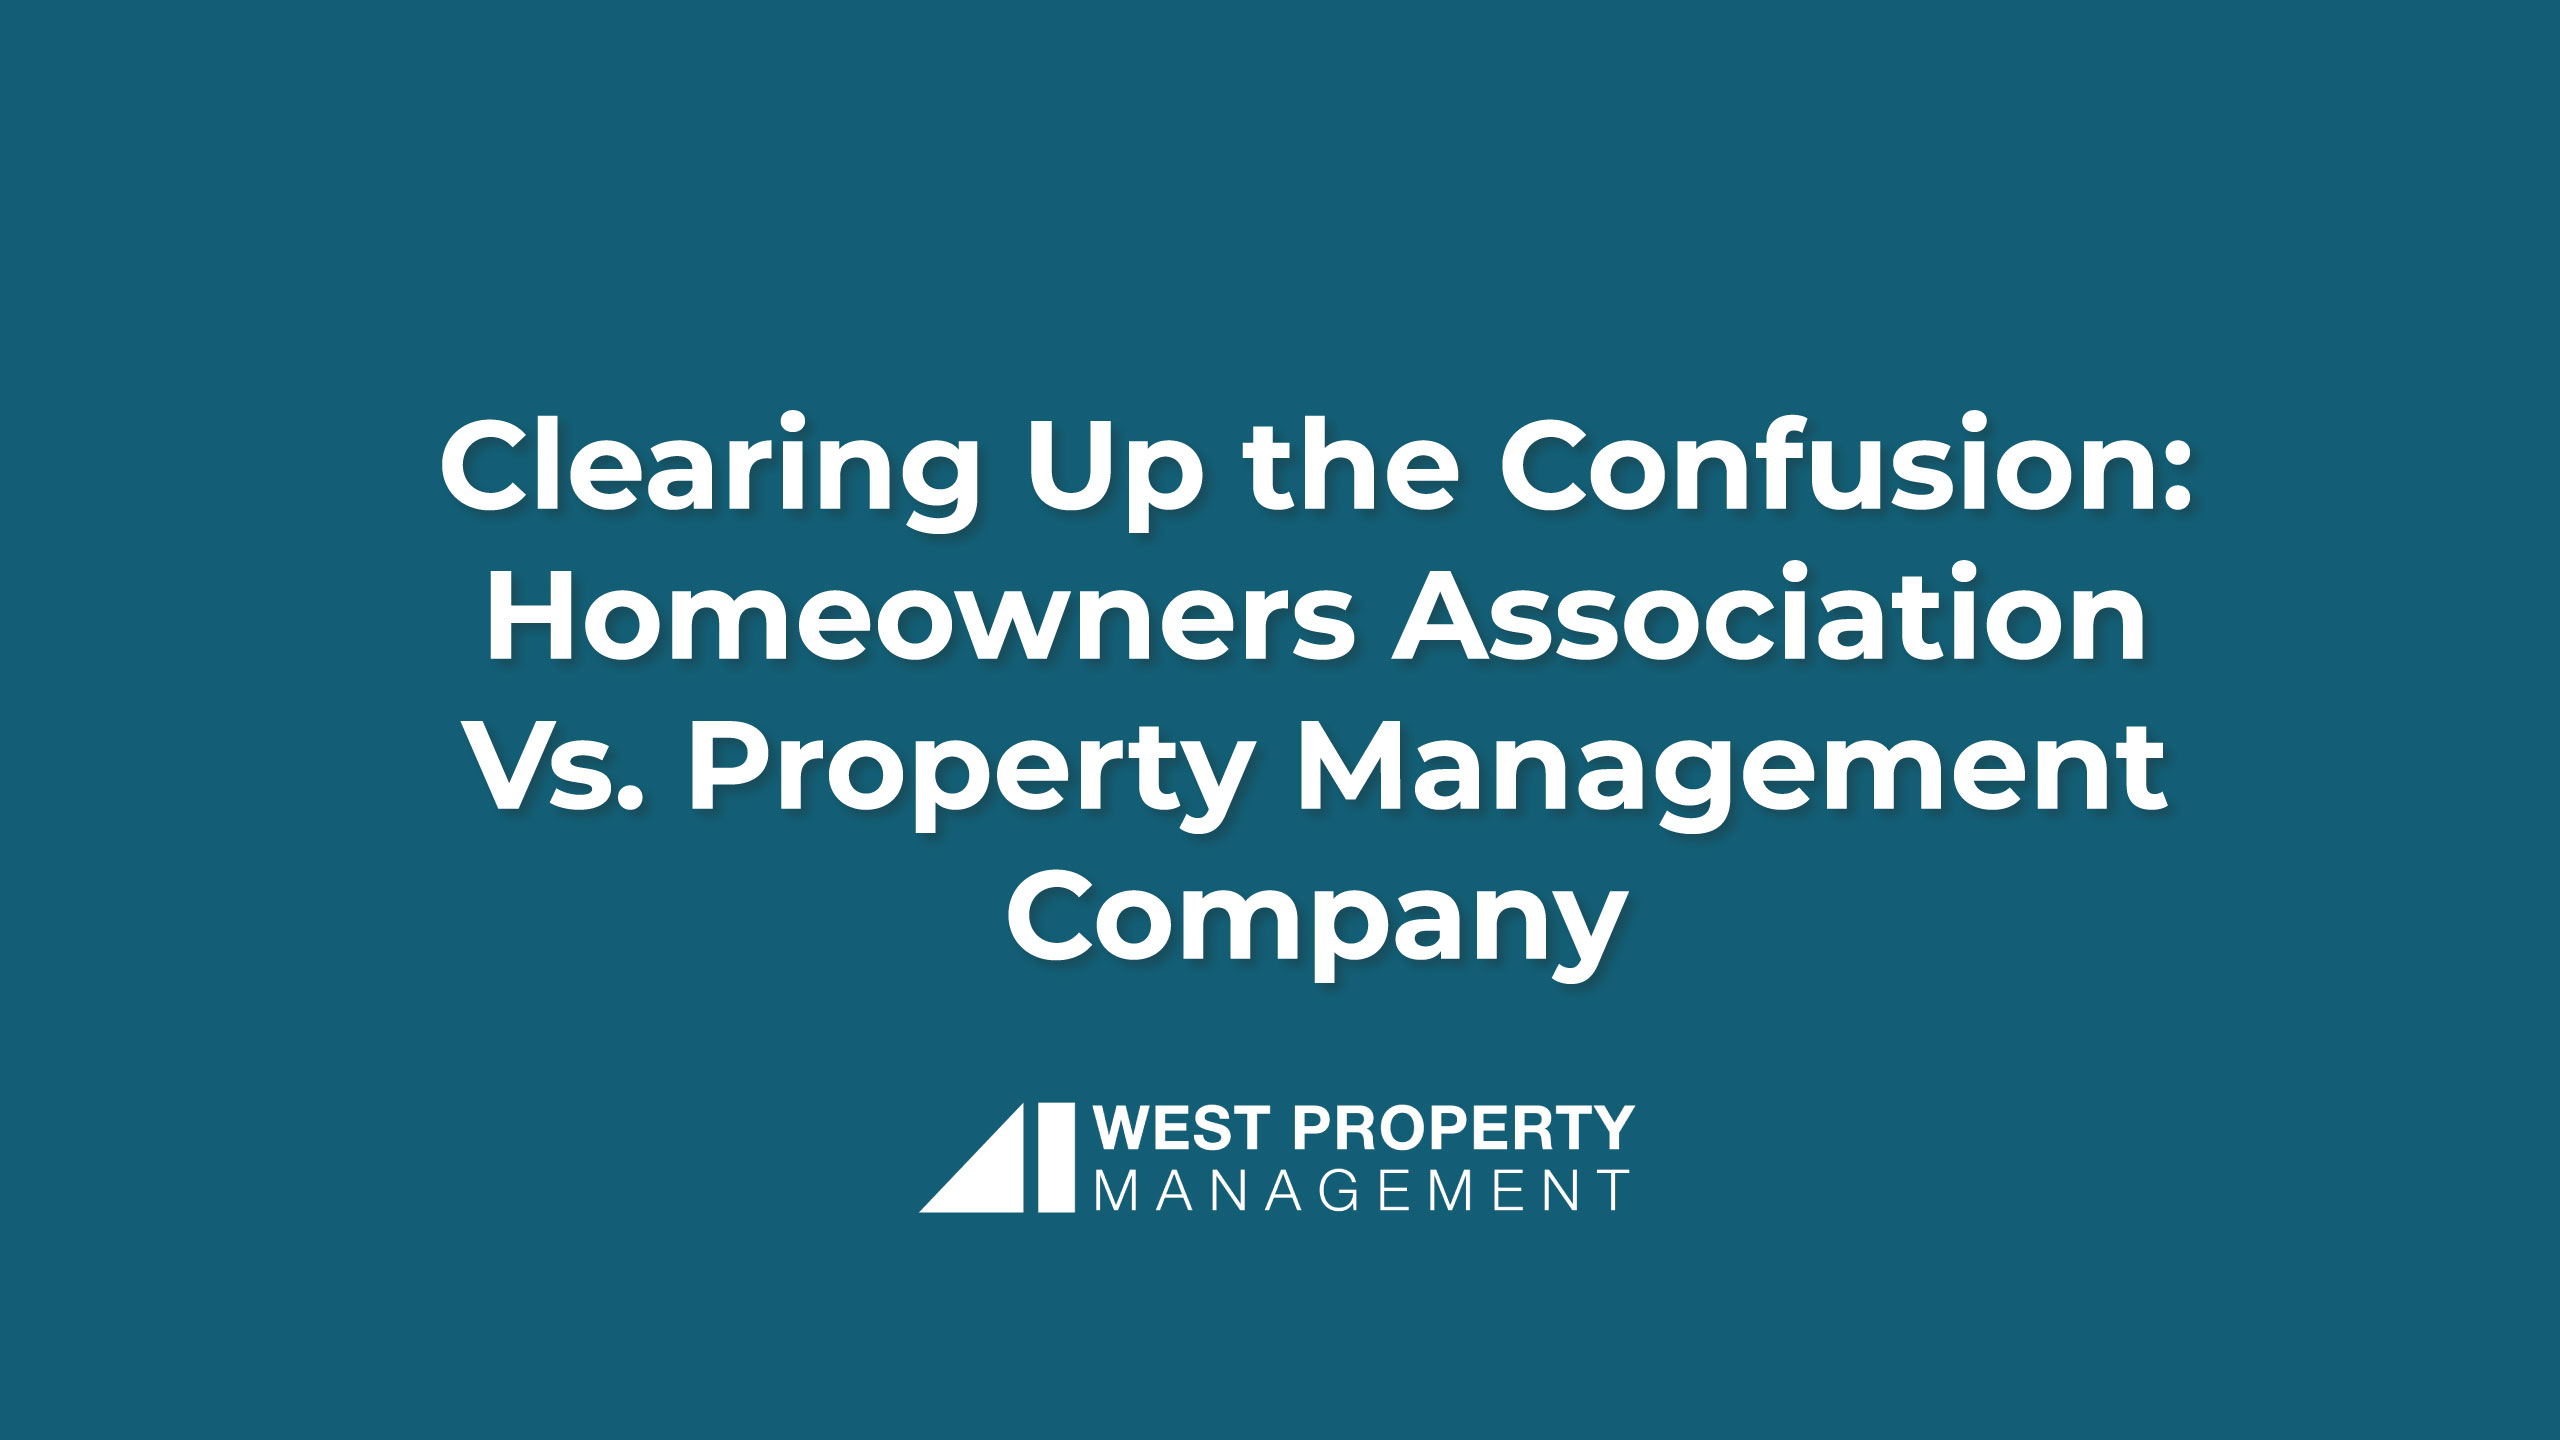 Clearing Up the Confusion: Homeowners Association Vs. Property Management Company